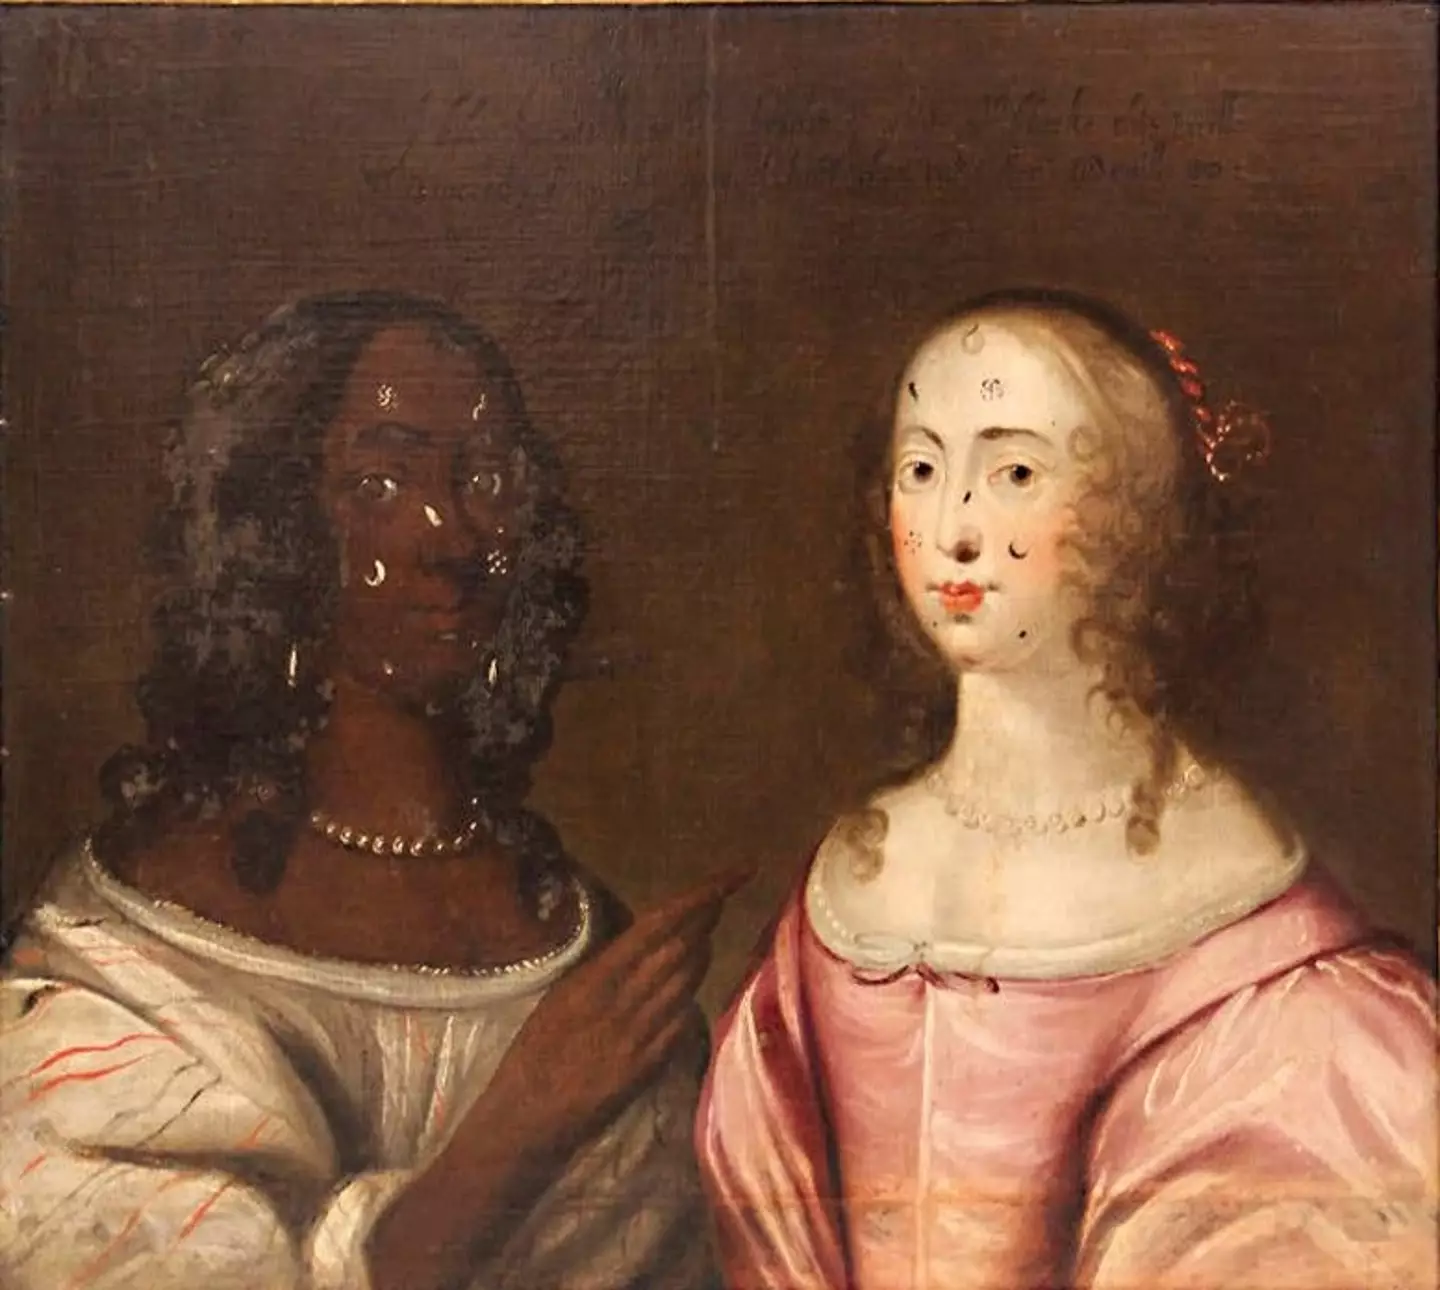 Allegorical Painting of Two Ladies by an anonymous artist was bought for £220,000 and then £300,000 to stop it leaving the UK.